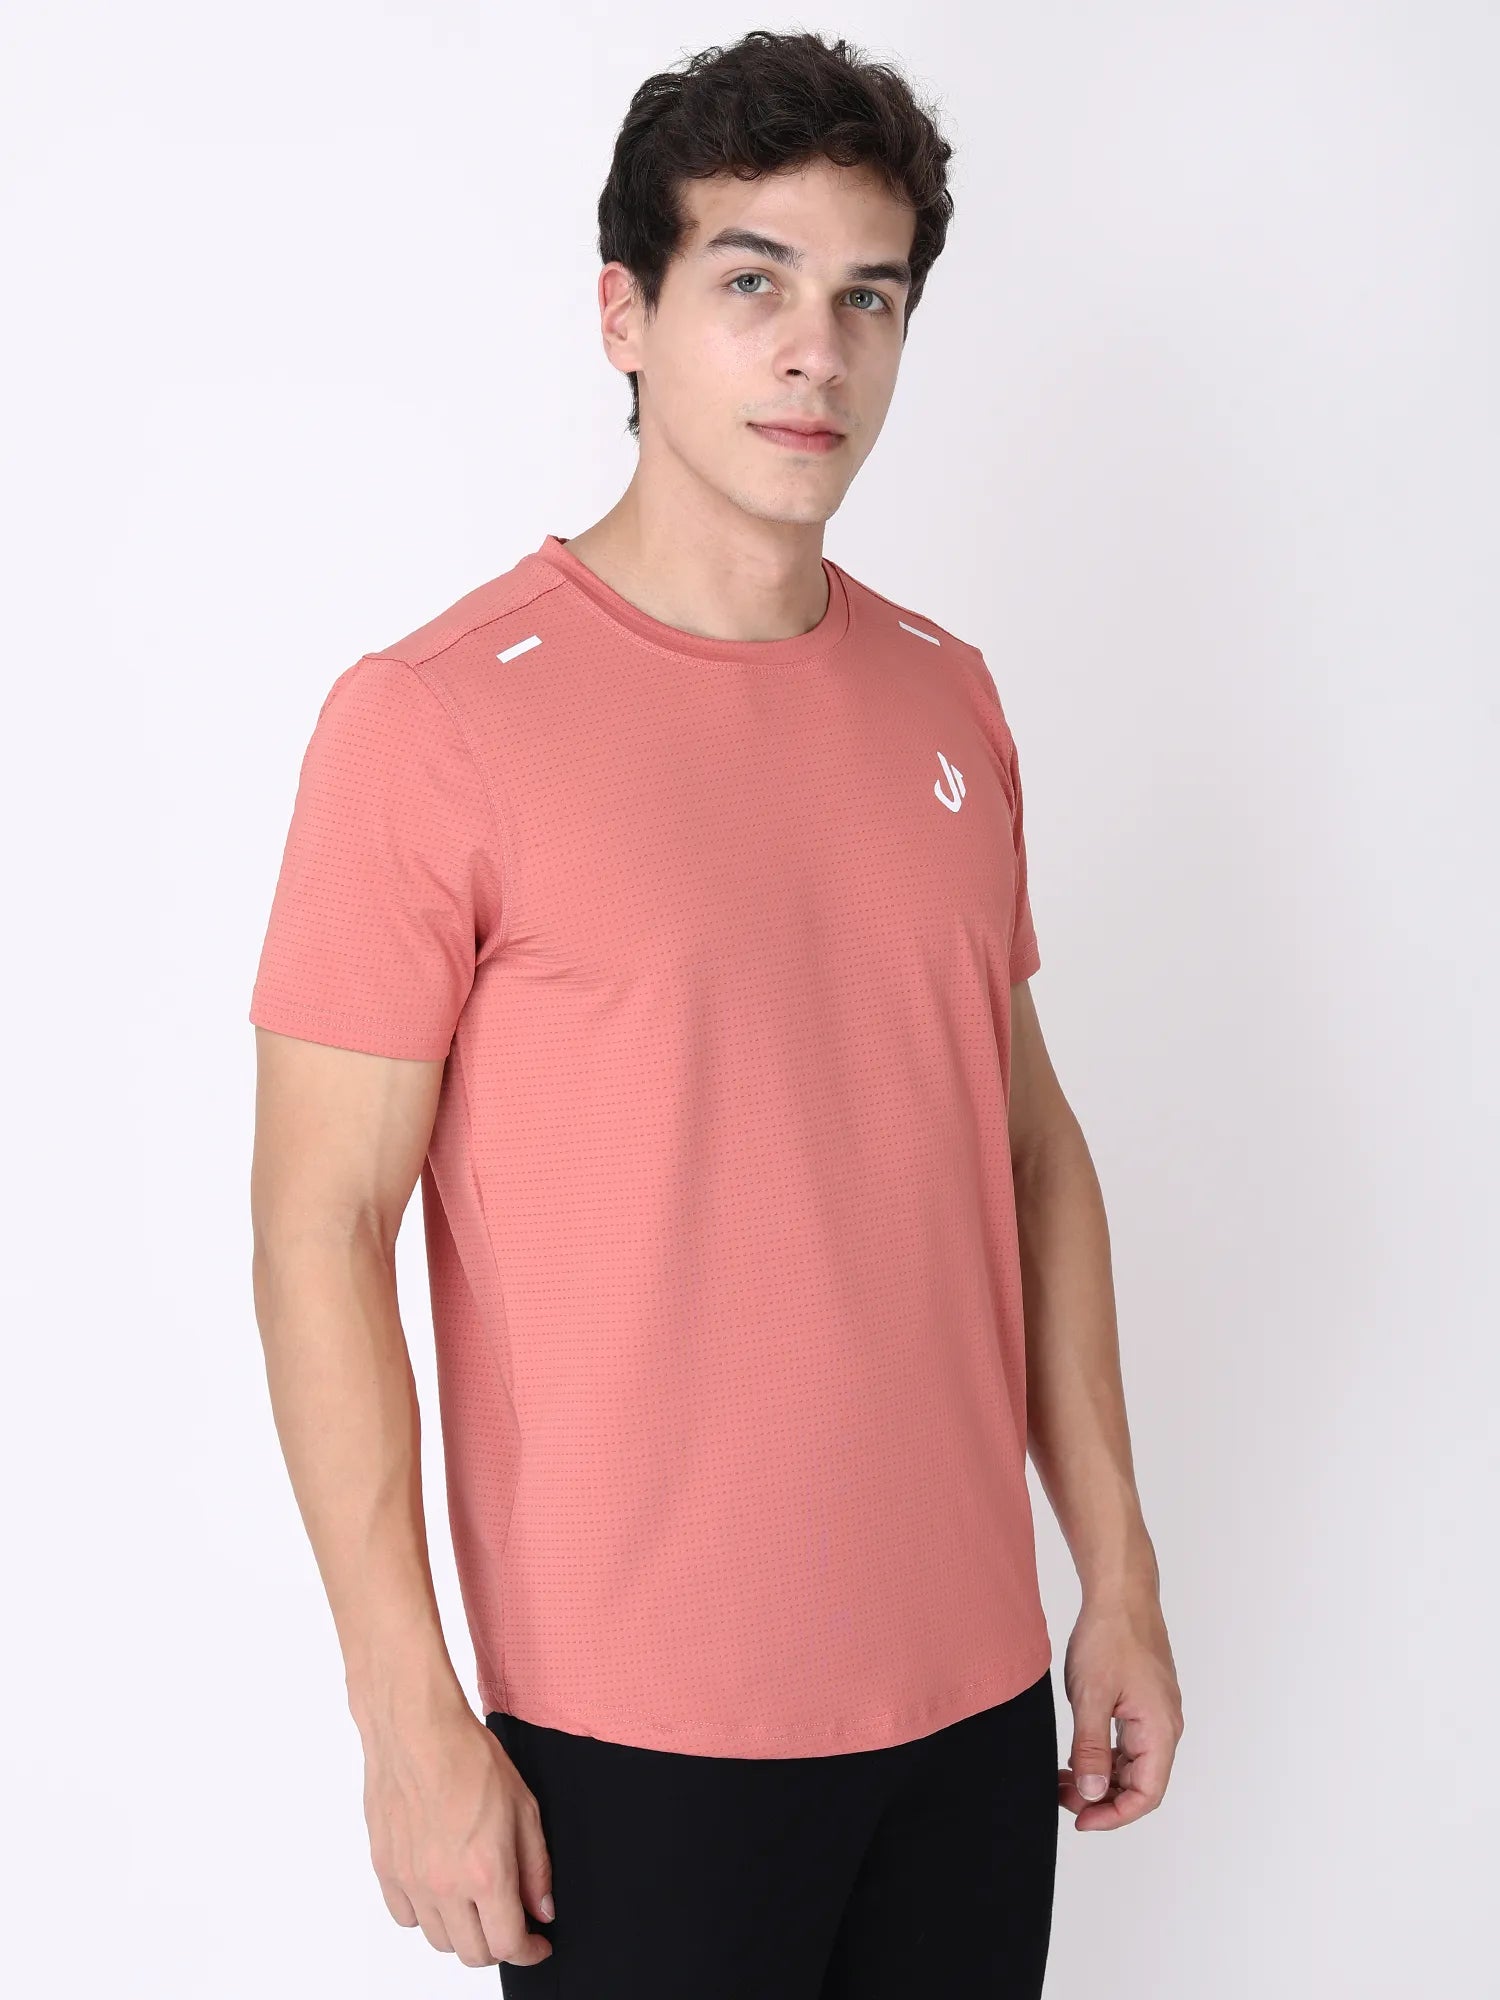 Training T-shirts (Coral)